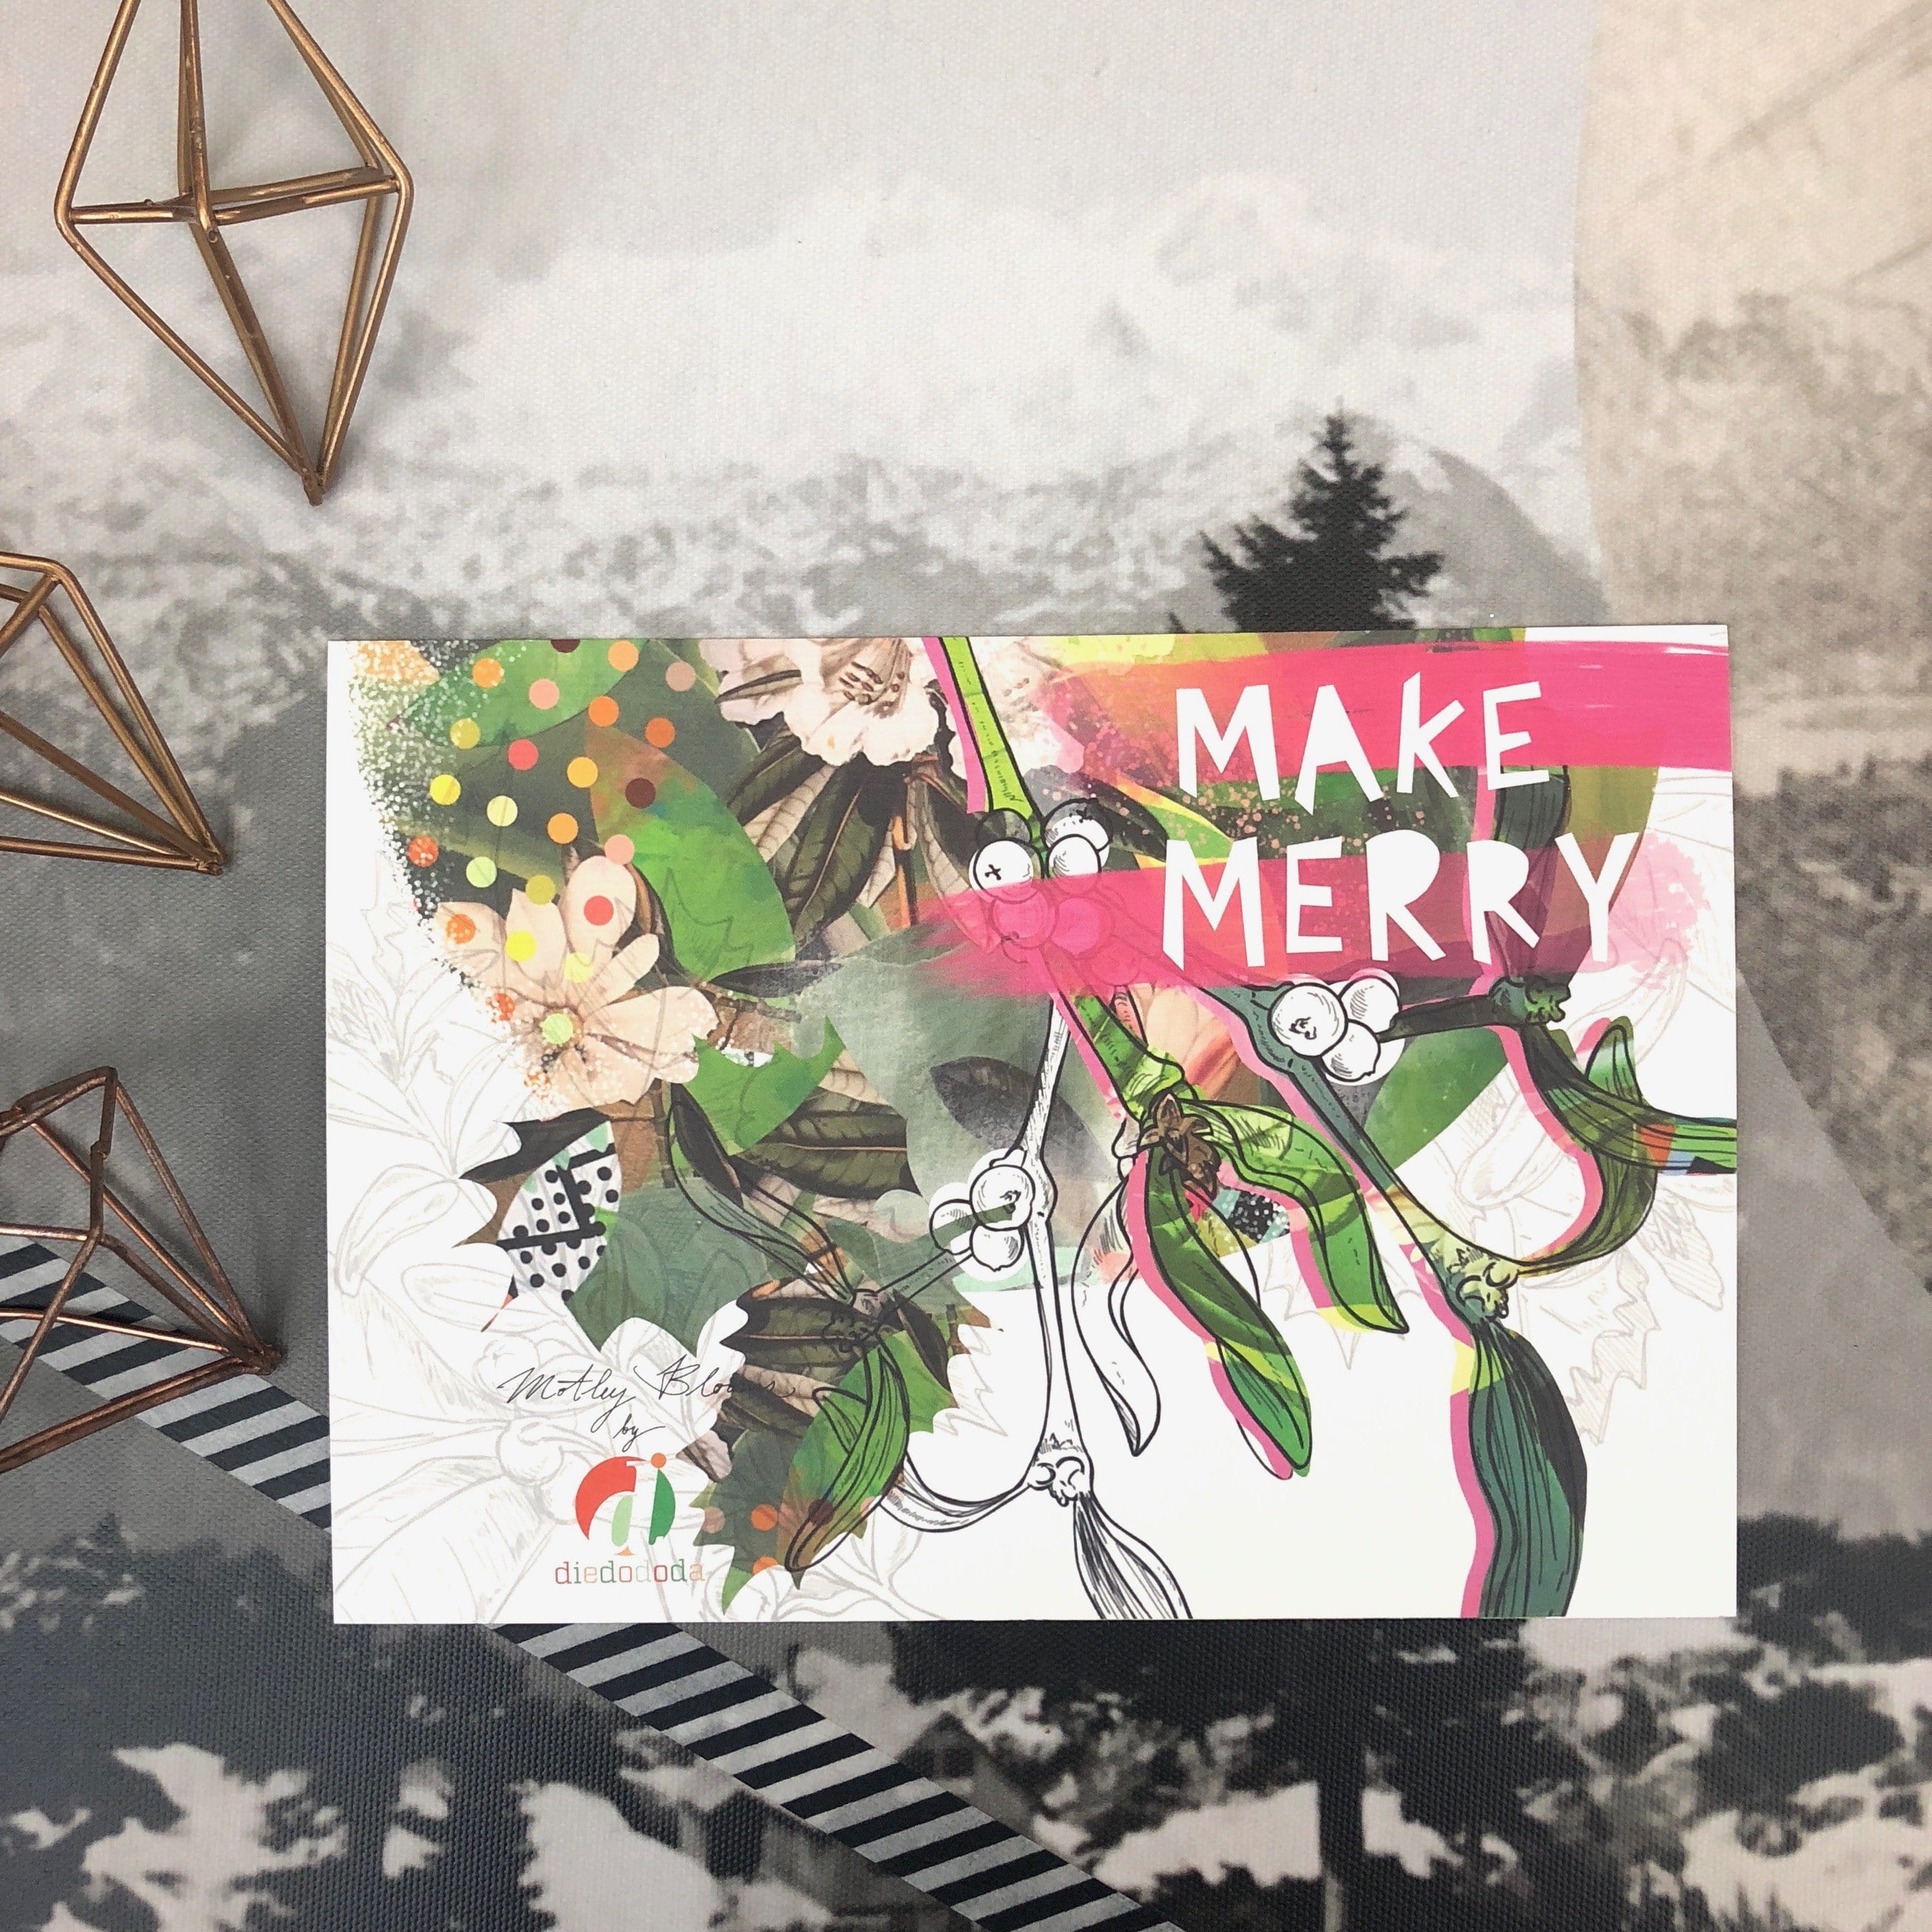 Make Merry Greeting Card Motley Blooms Greeting Cards Card